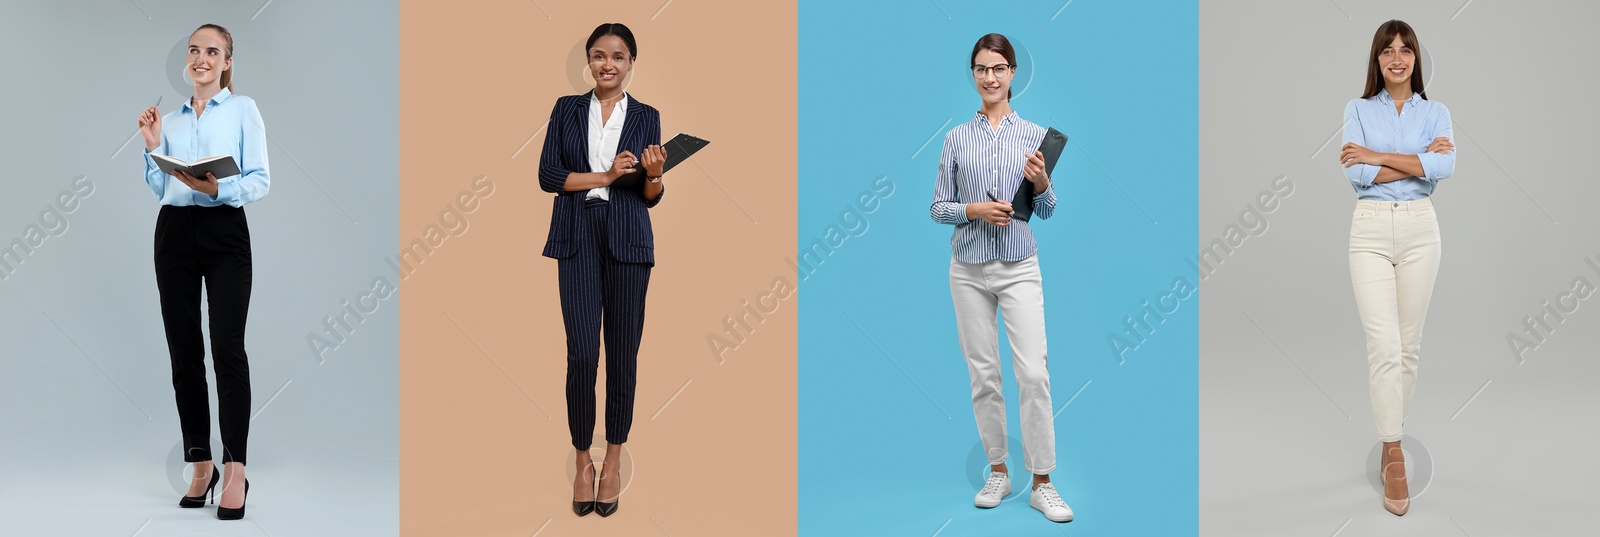 Image of Collage with photos of beautiful secretaries on different color backgrounds